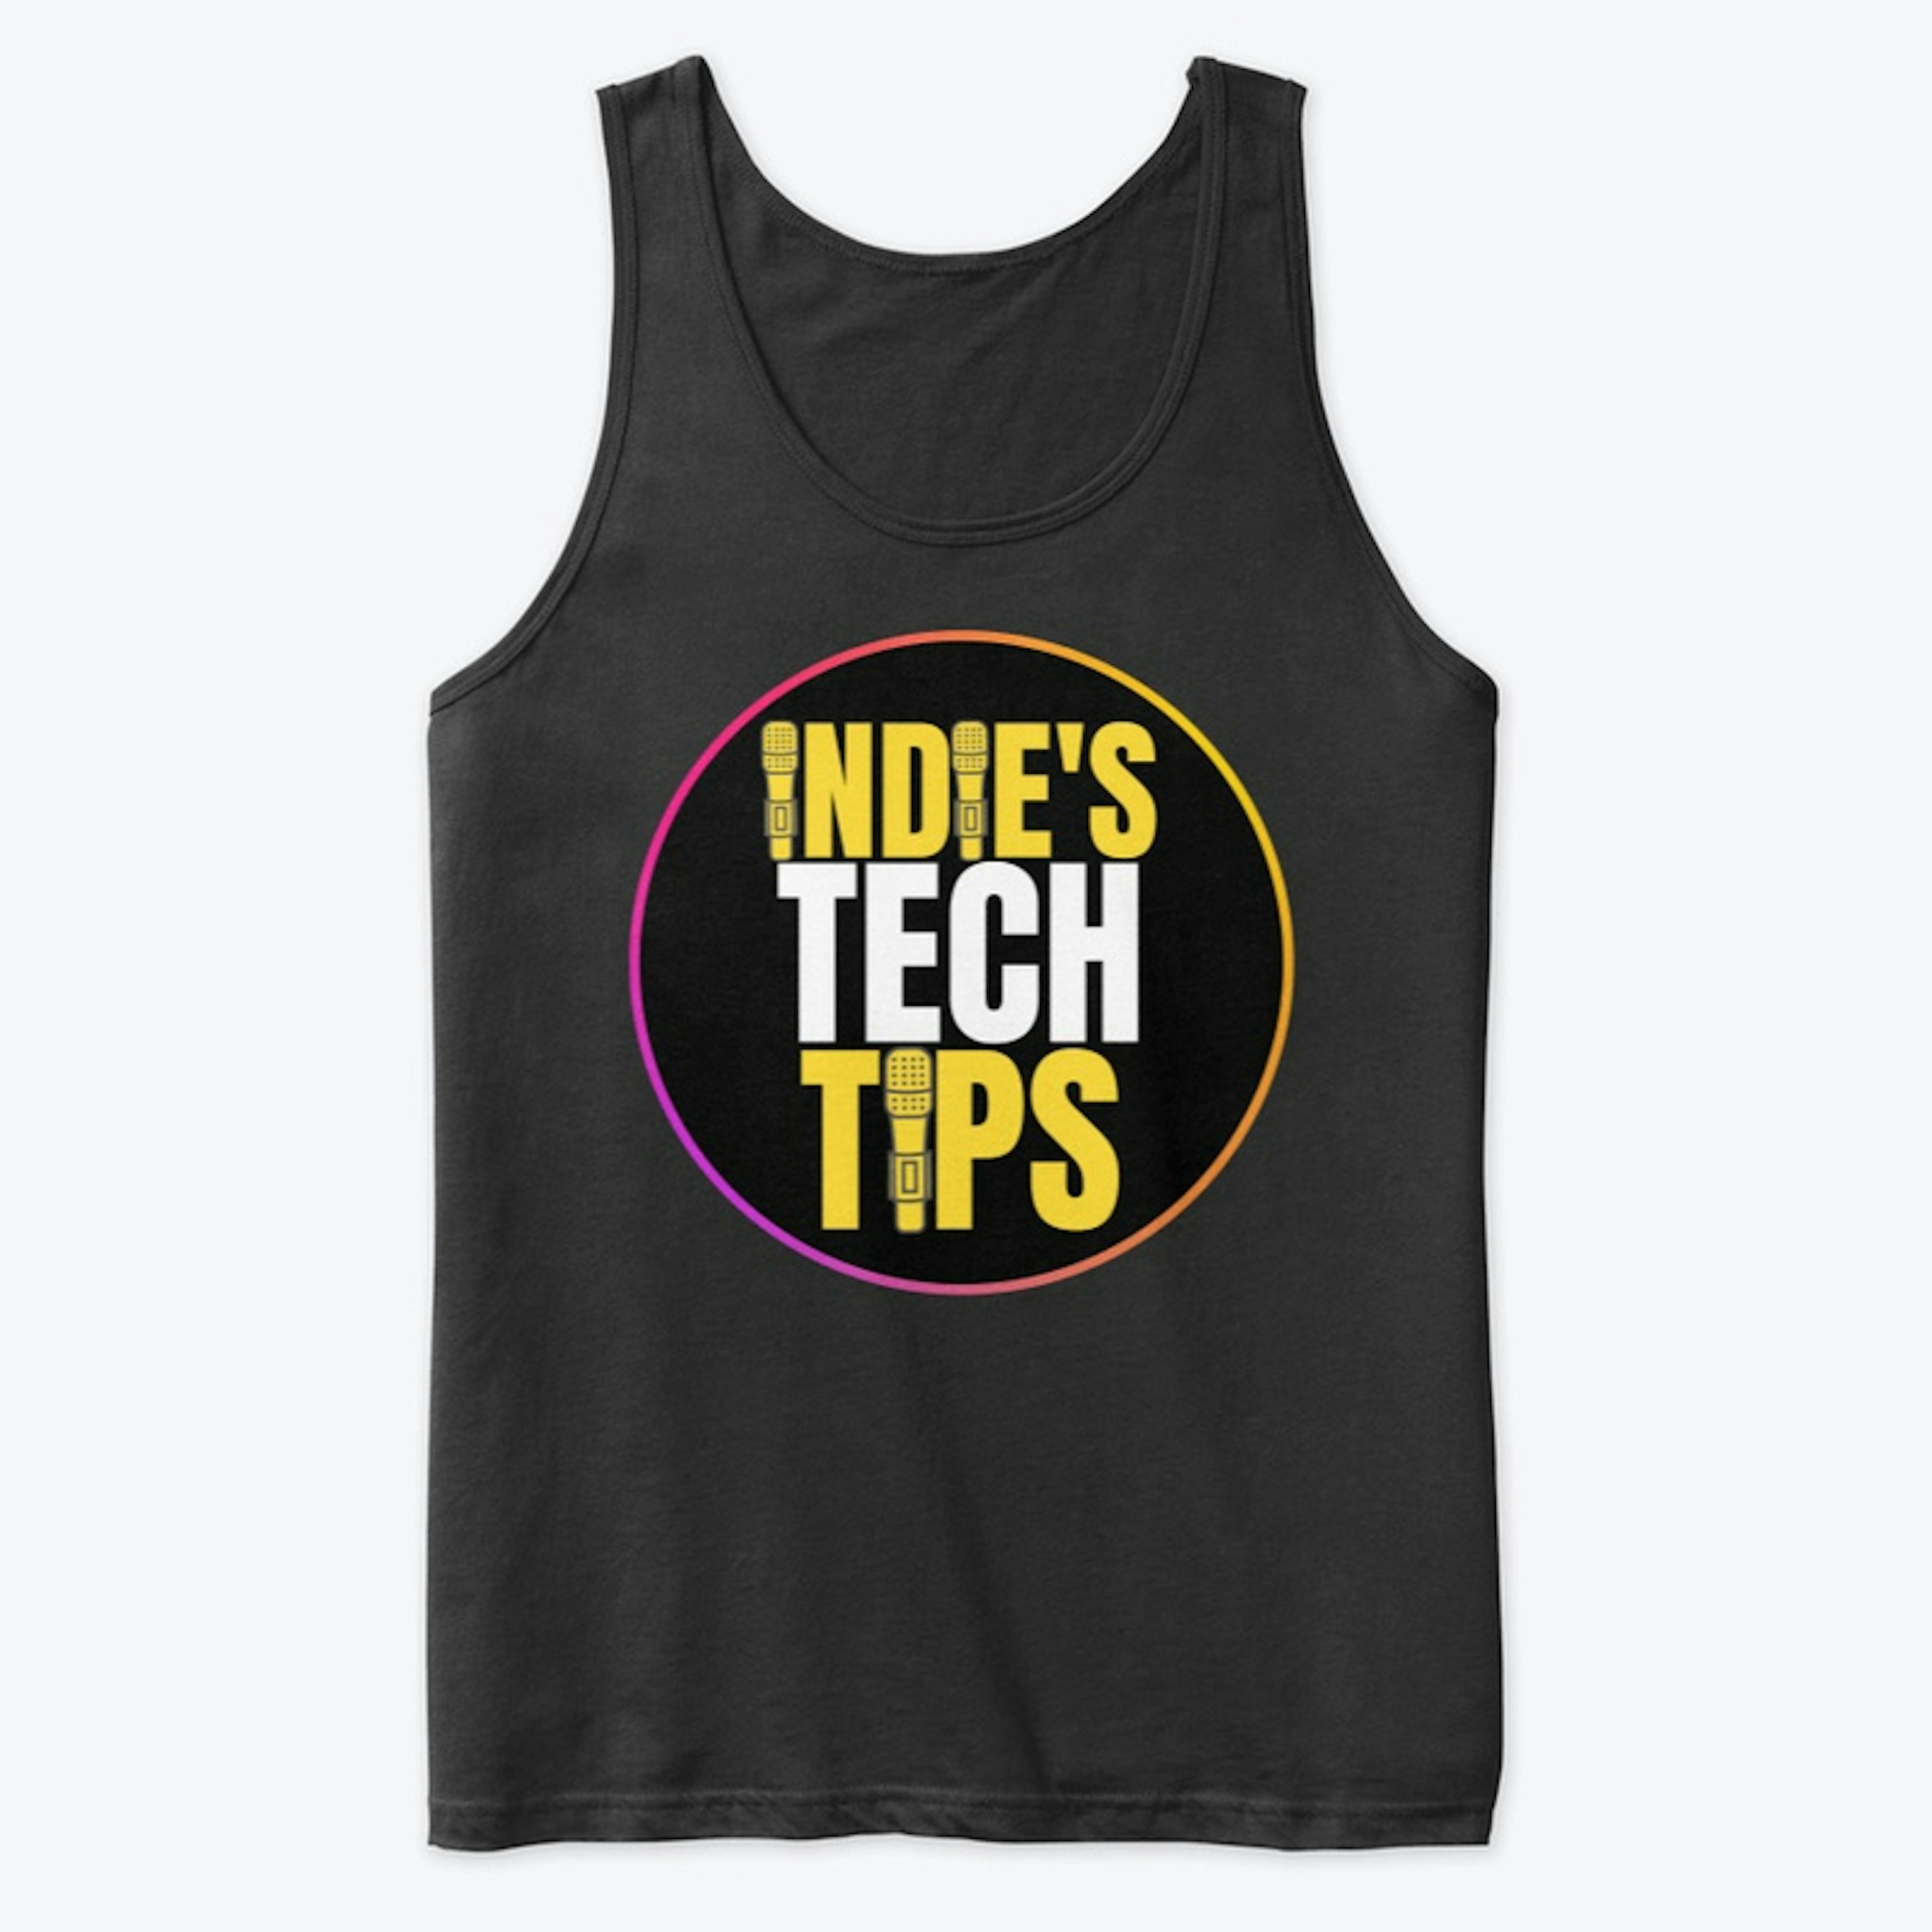 Indie's Tech Tips Collection